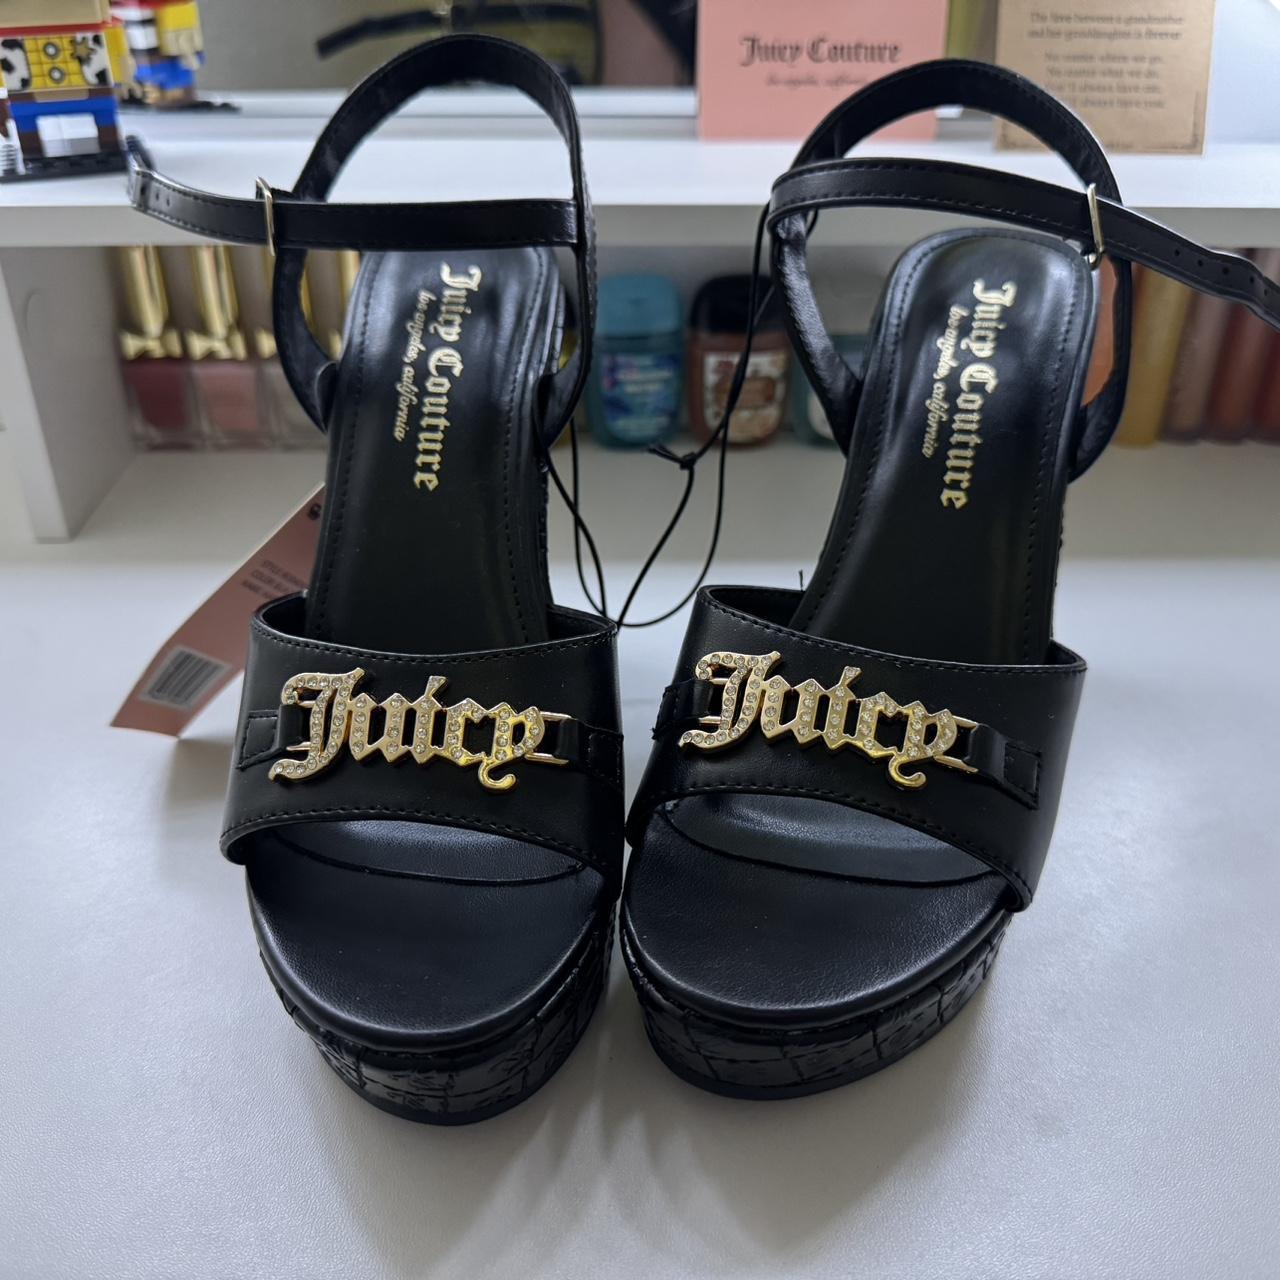 Dessert sandals Perfect for beach days and casual - Depop